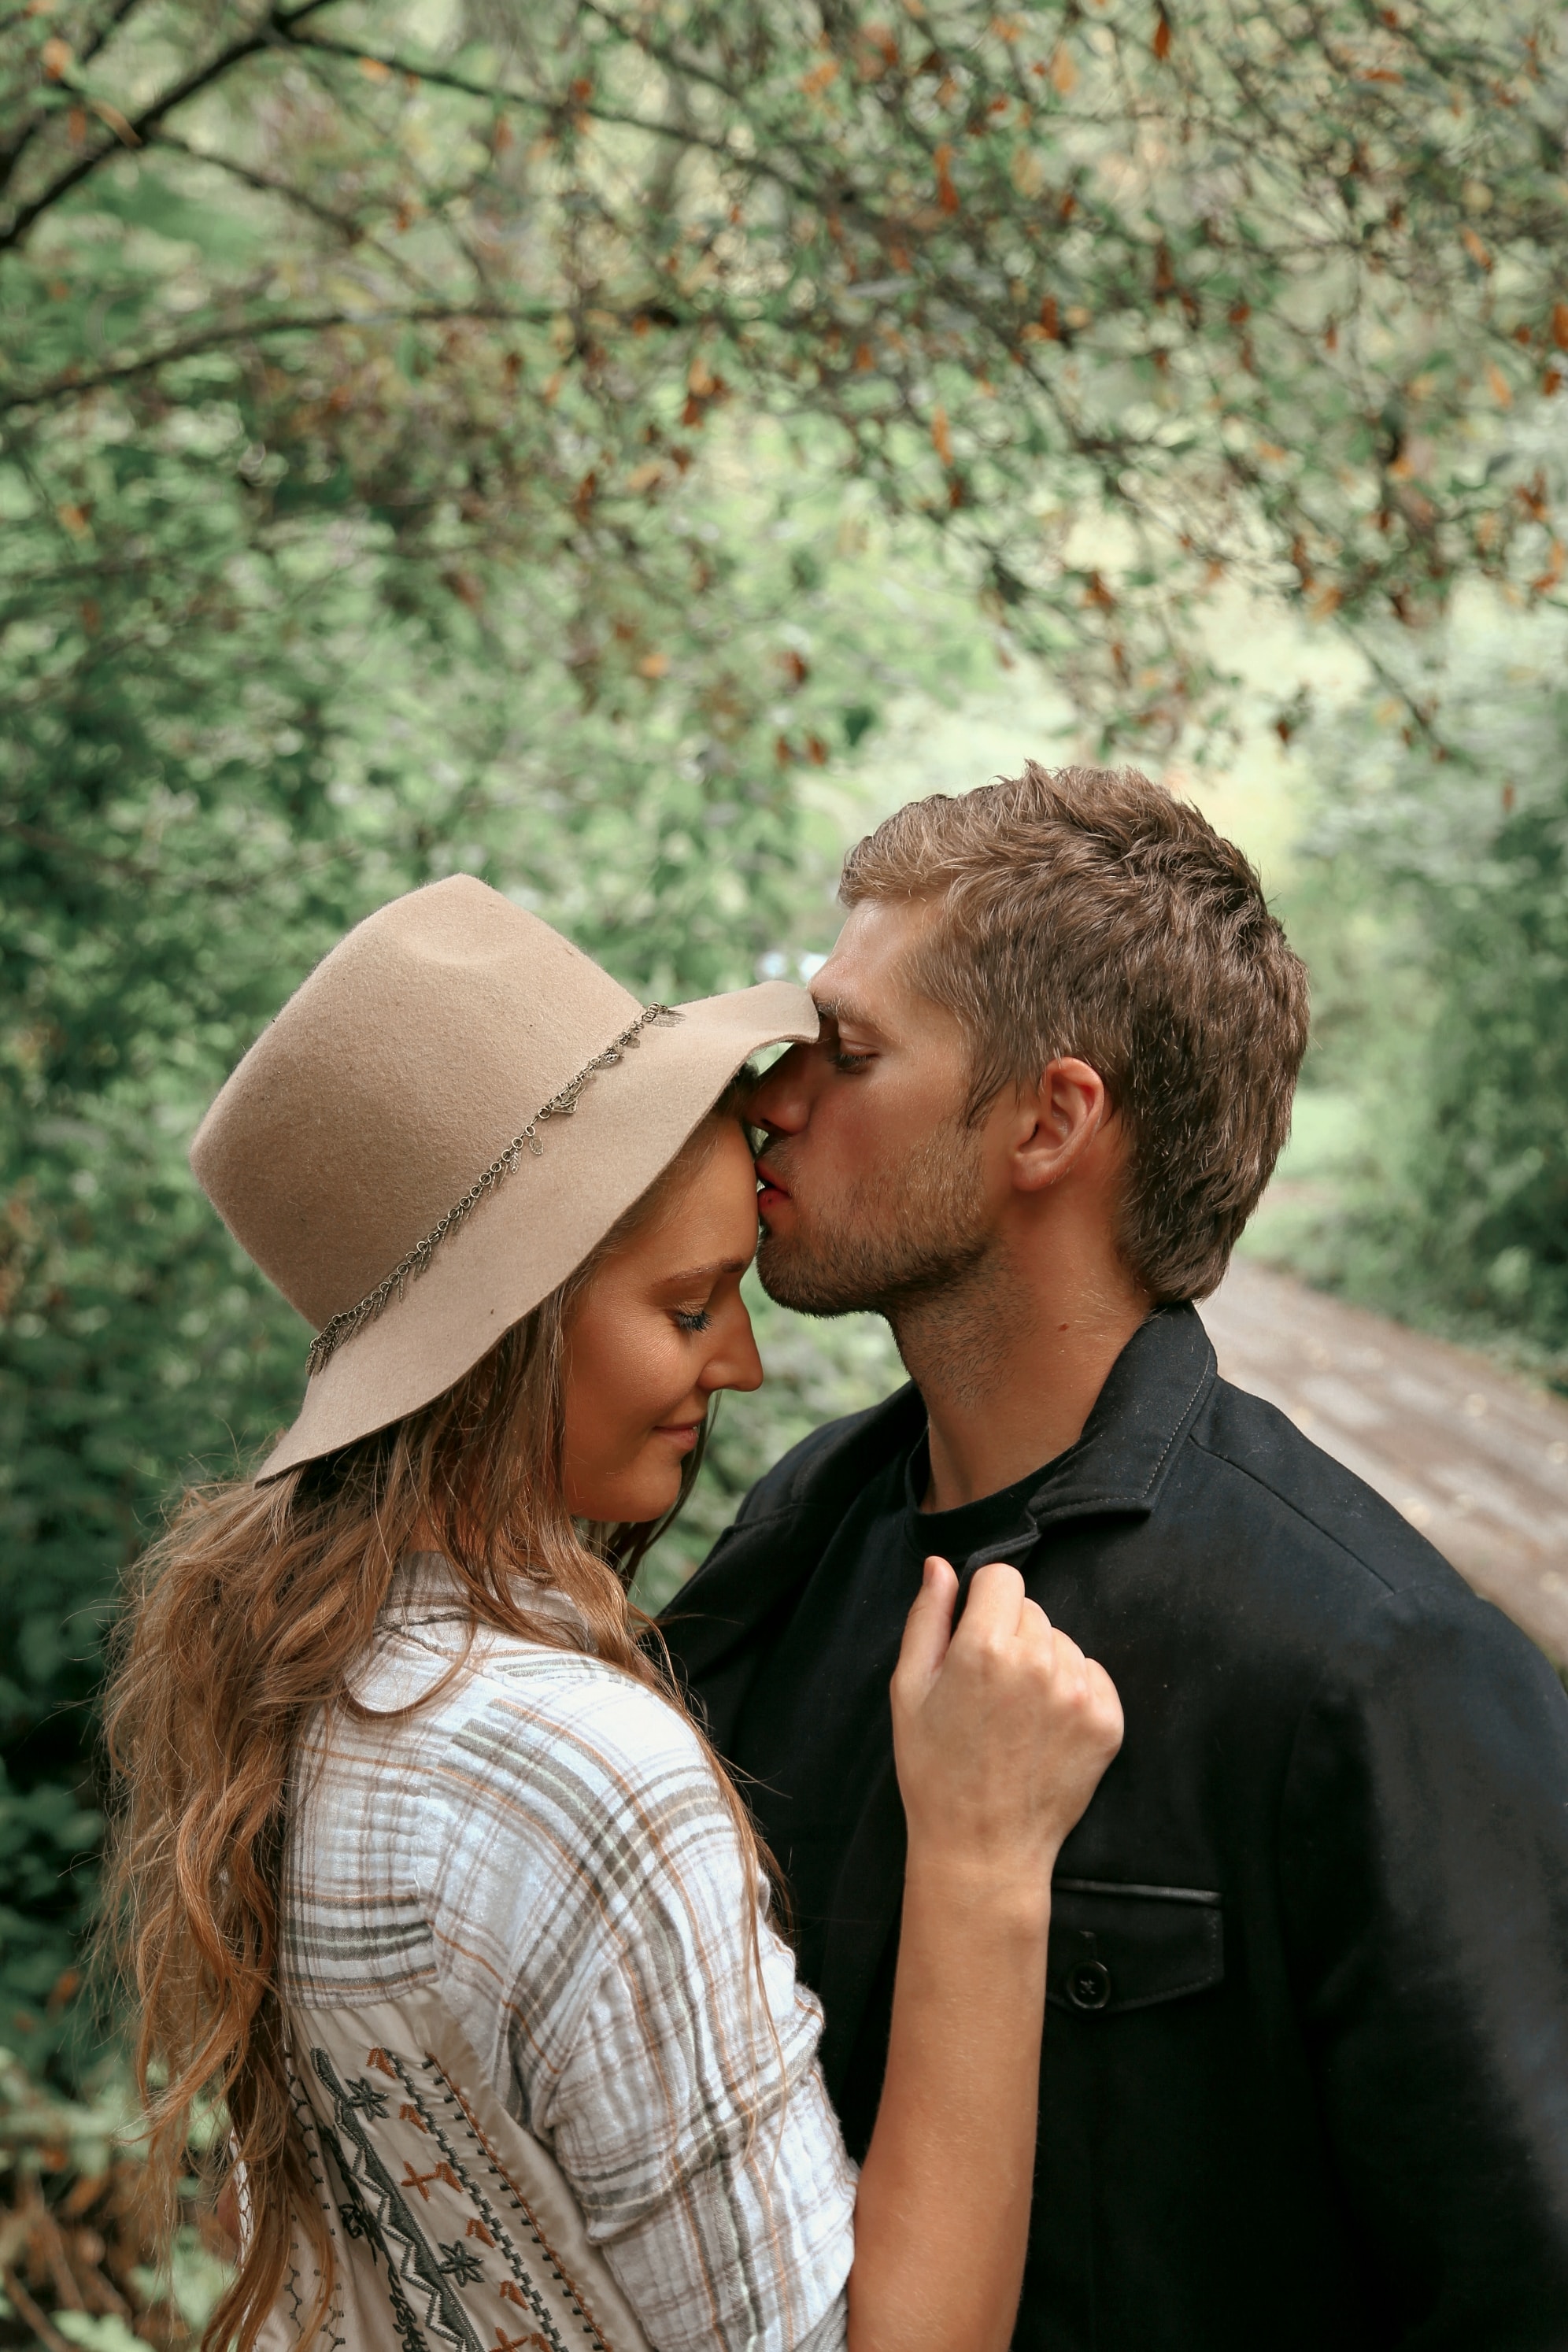 A man kissing a woman on her forehead. | Source: Unsplash